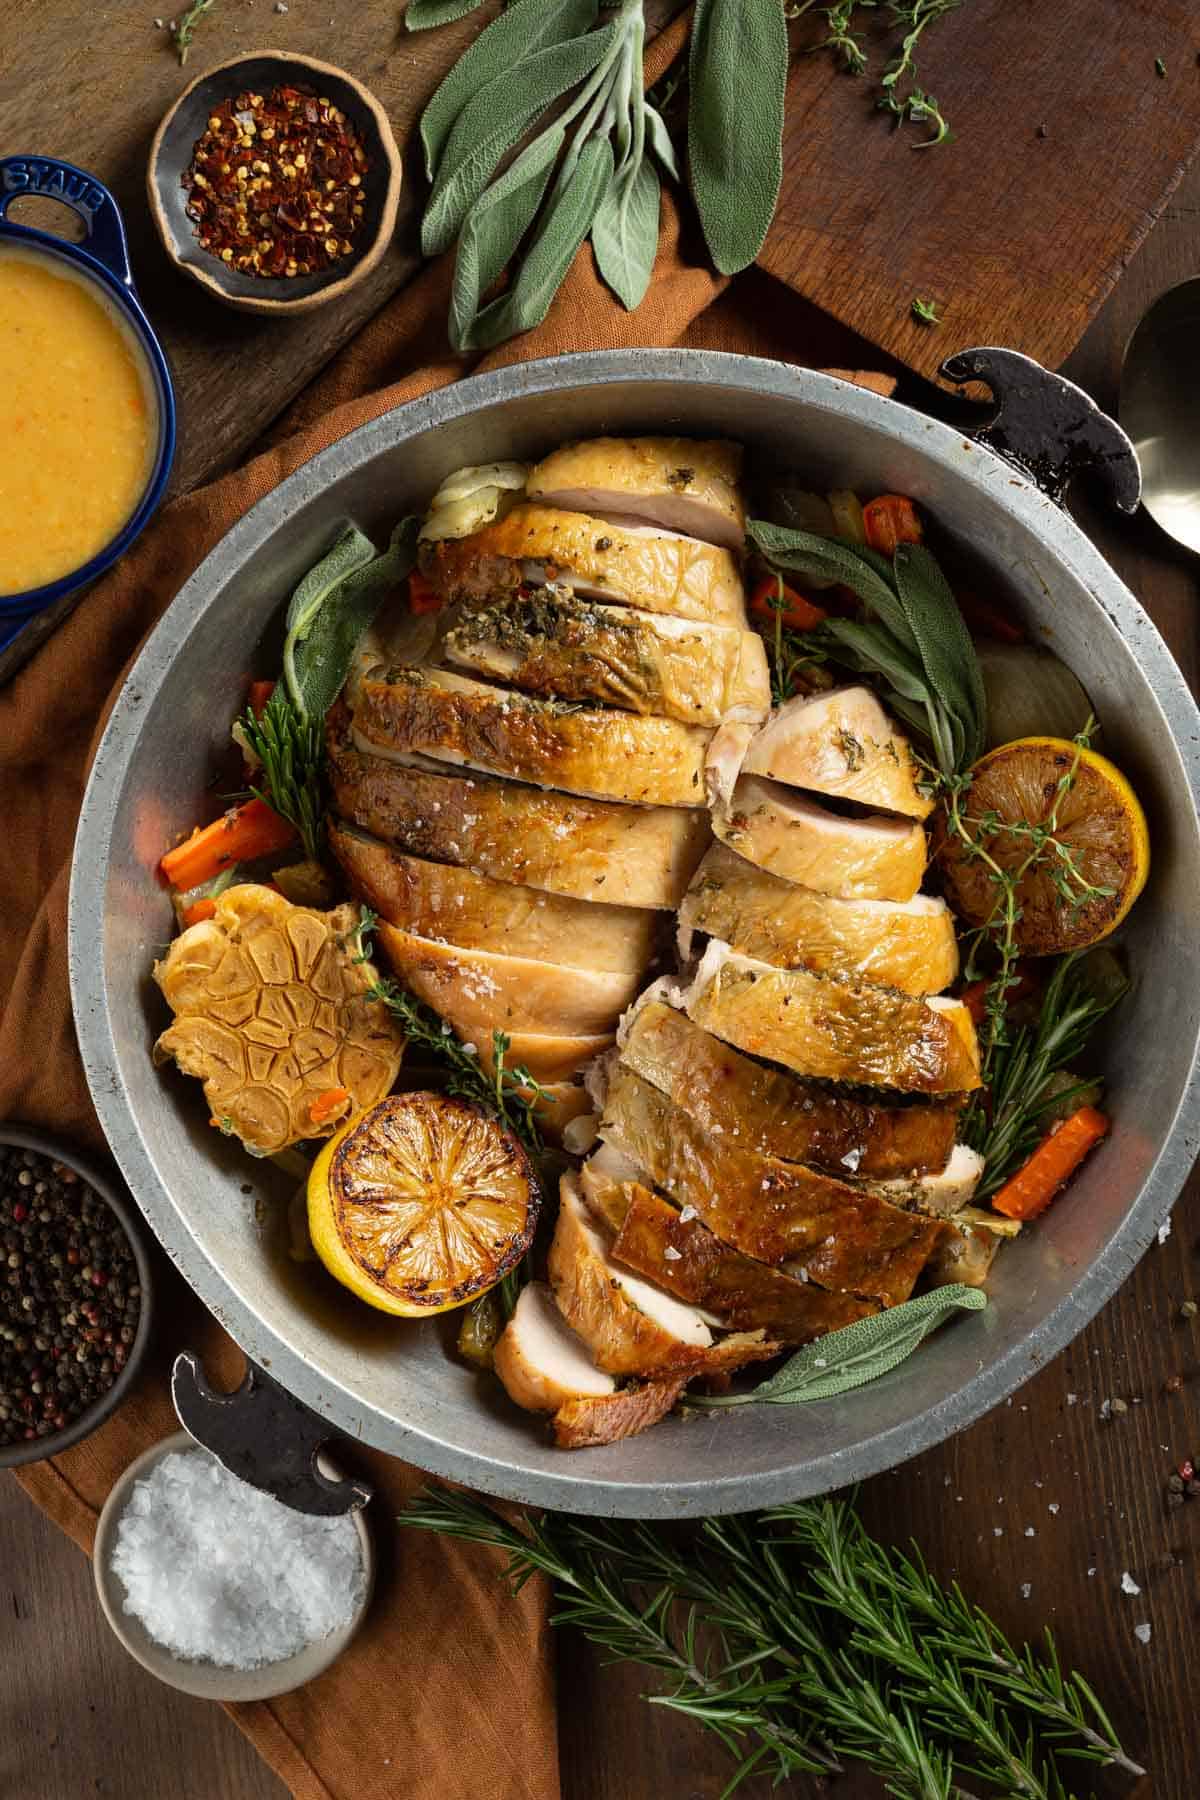 Sliced roasted turkey breast in a serving platter with fresh herbs and roasted vegetables.